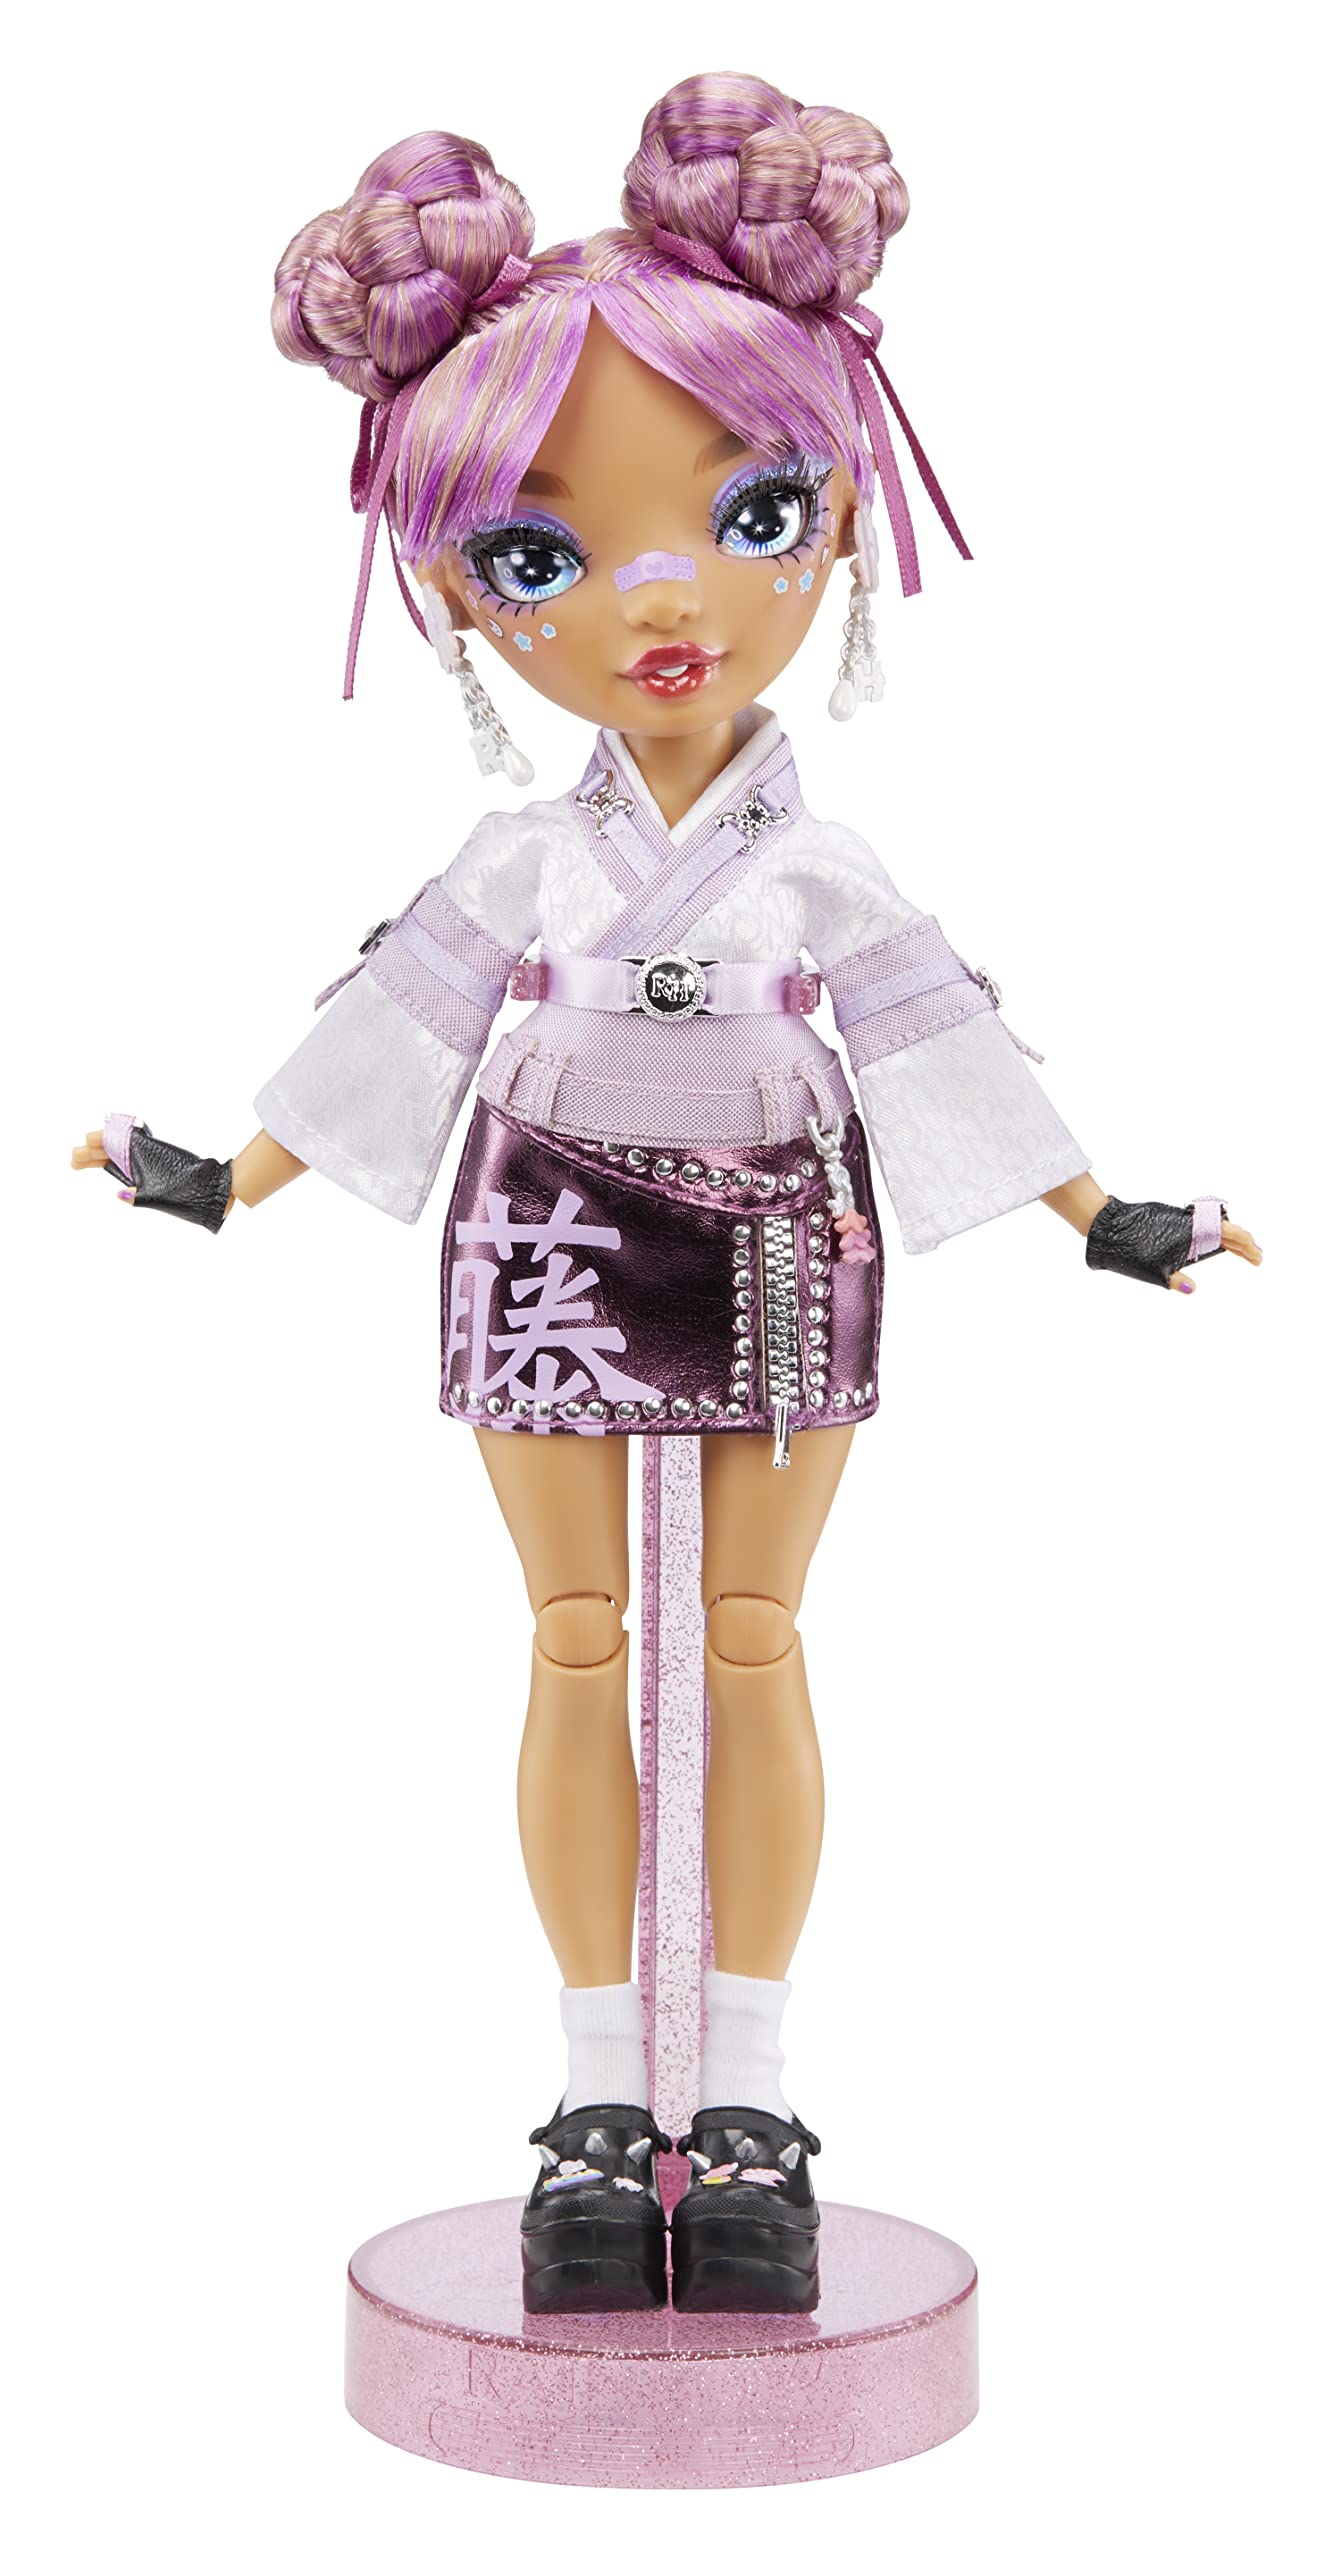 Rainbow High Lila Yamamoto- Mauve Purple Fashion Doll. 2 Designer Outfits to Mix & Match with Accessories, Great Gift for Kids 6-12 Years Old and Collectors